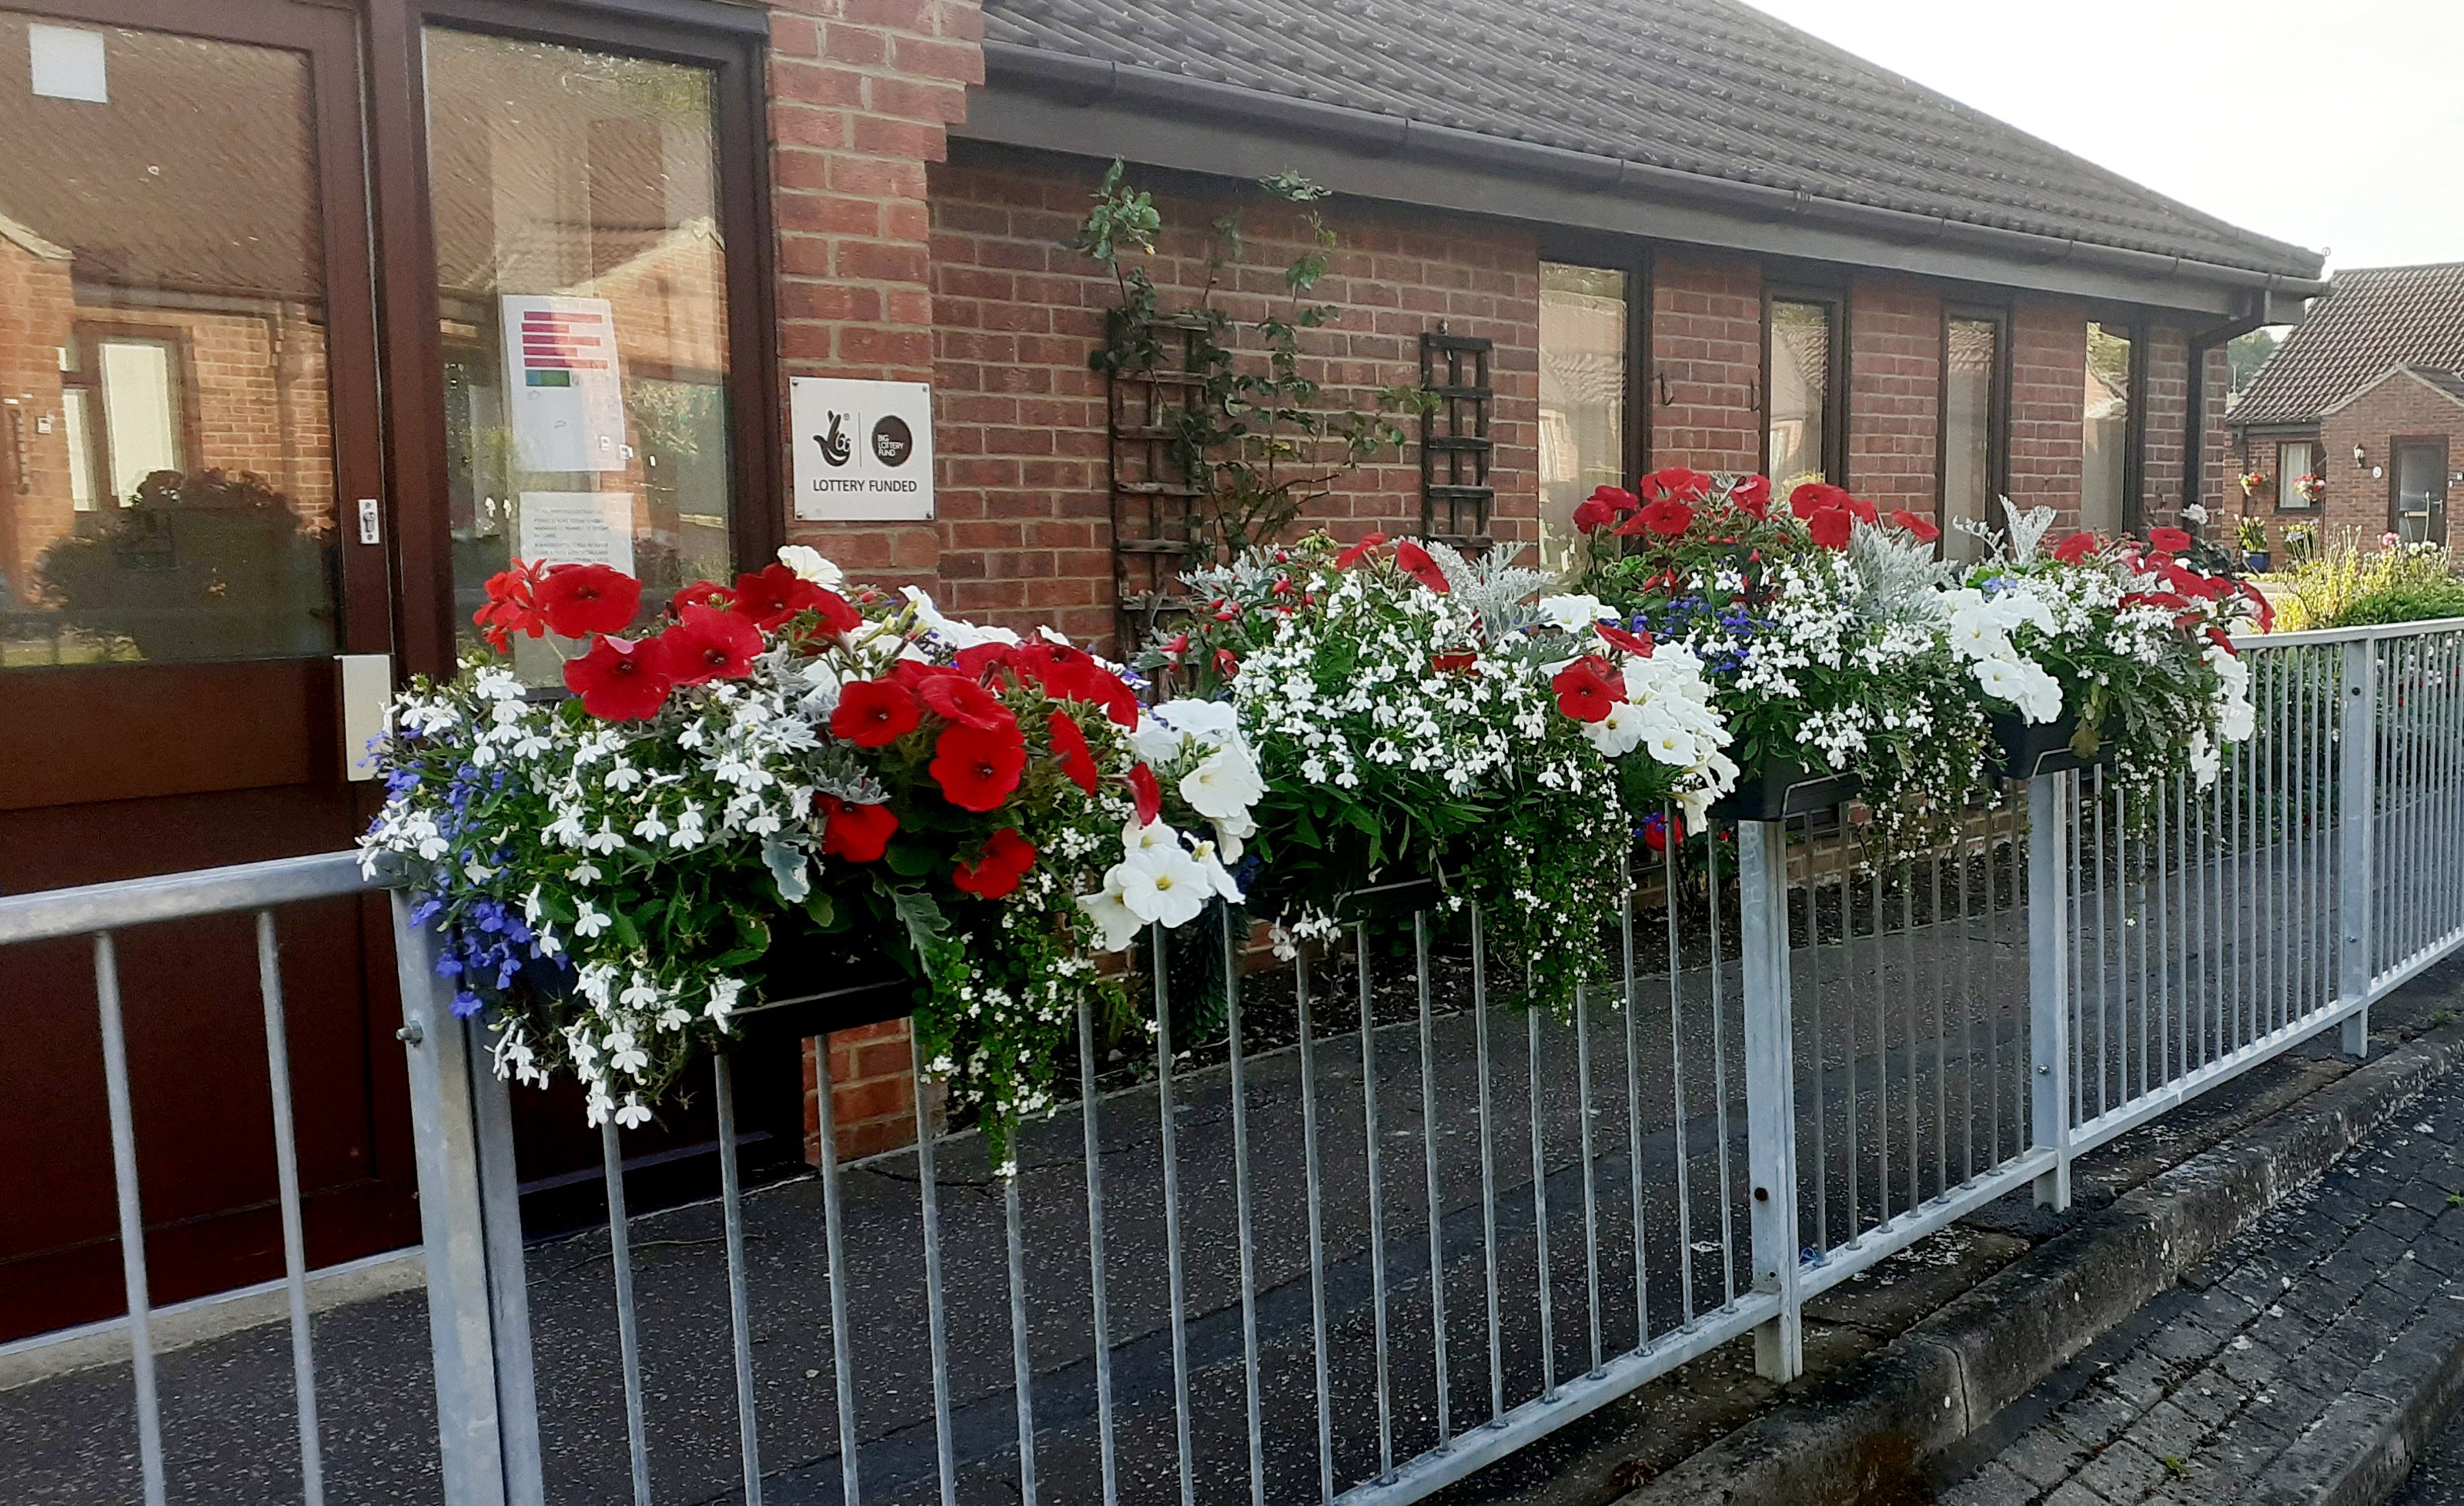 Red and white flowers on railings